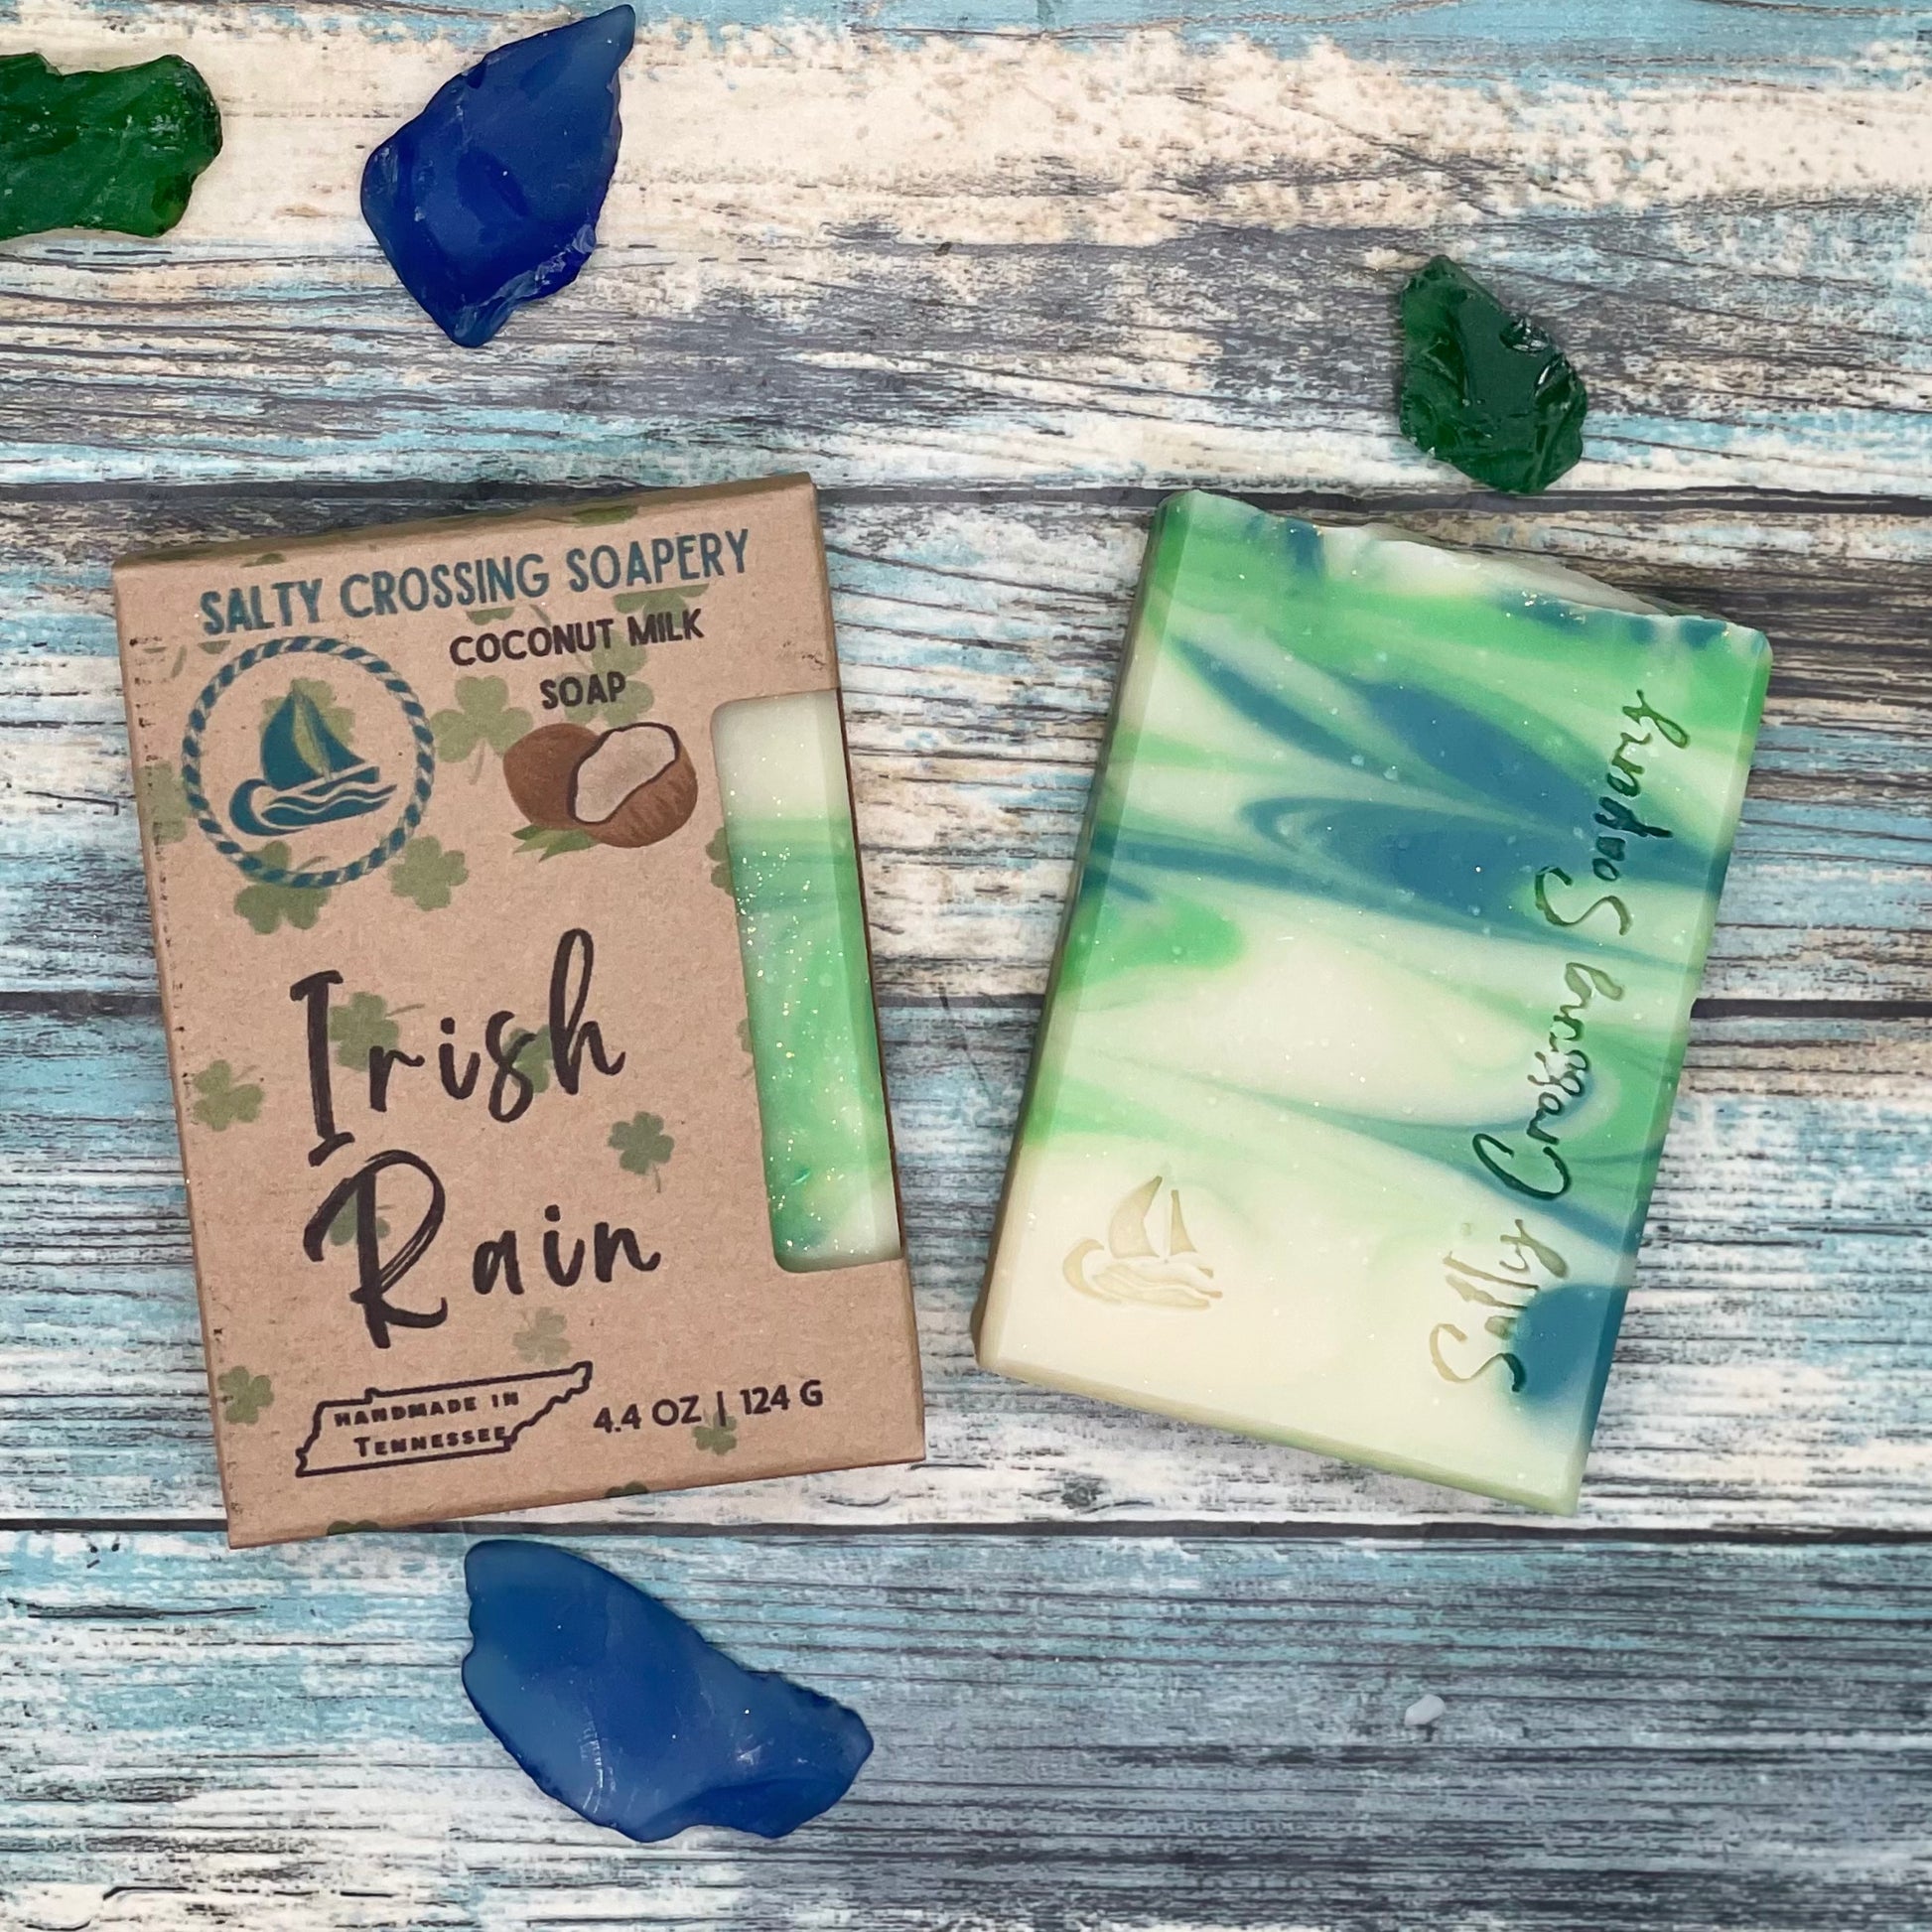 Irish rain handmade soap with box. Soap bar is green and white swirled with small sailboat graphic and salty crossing Soapery text stamped on the front. The box is kraft paperboard with color text and graphics